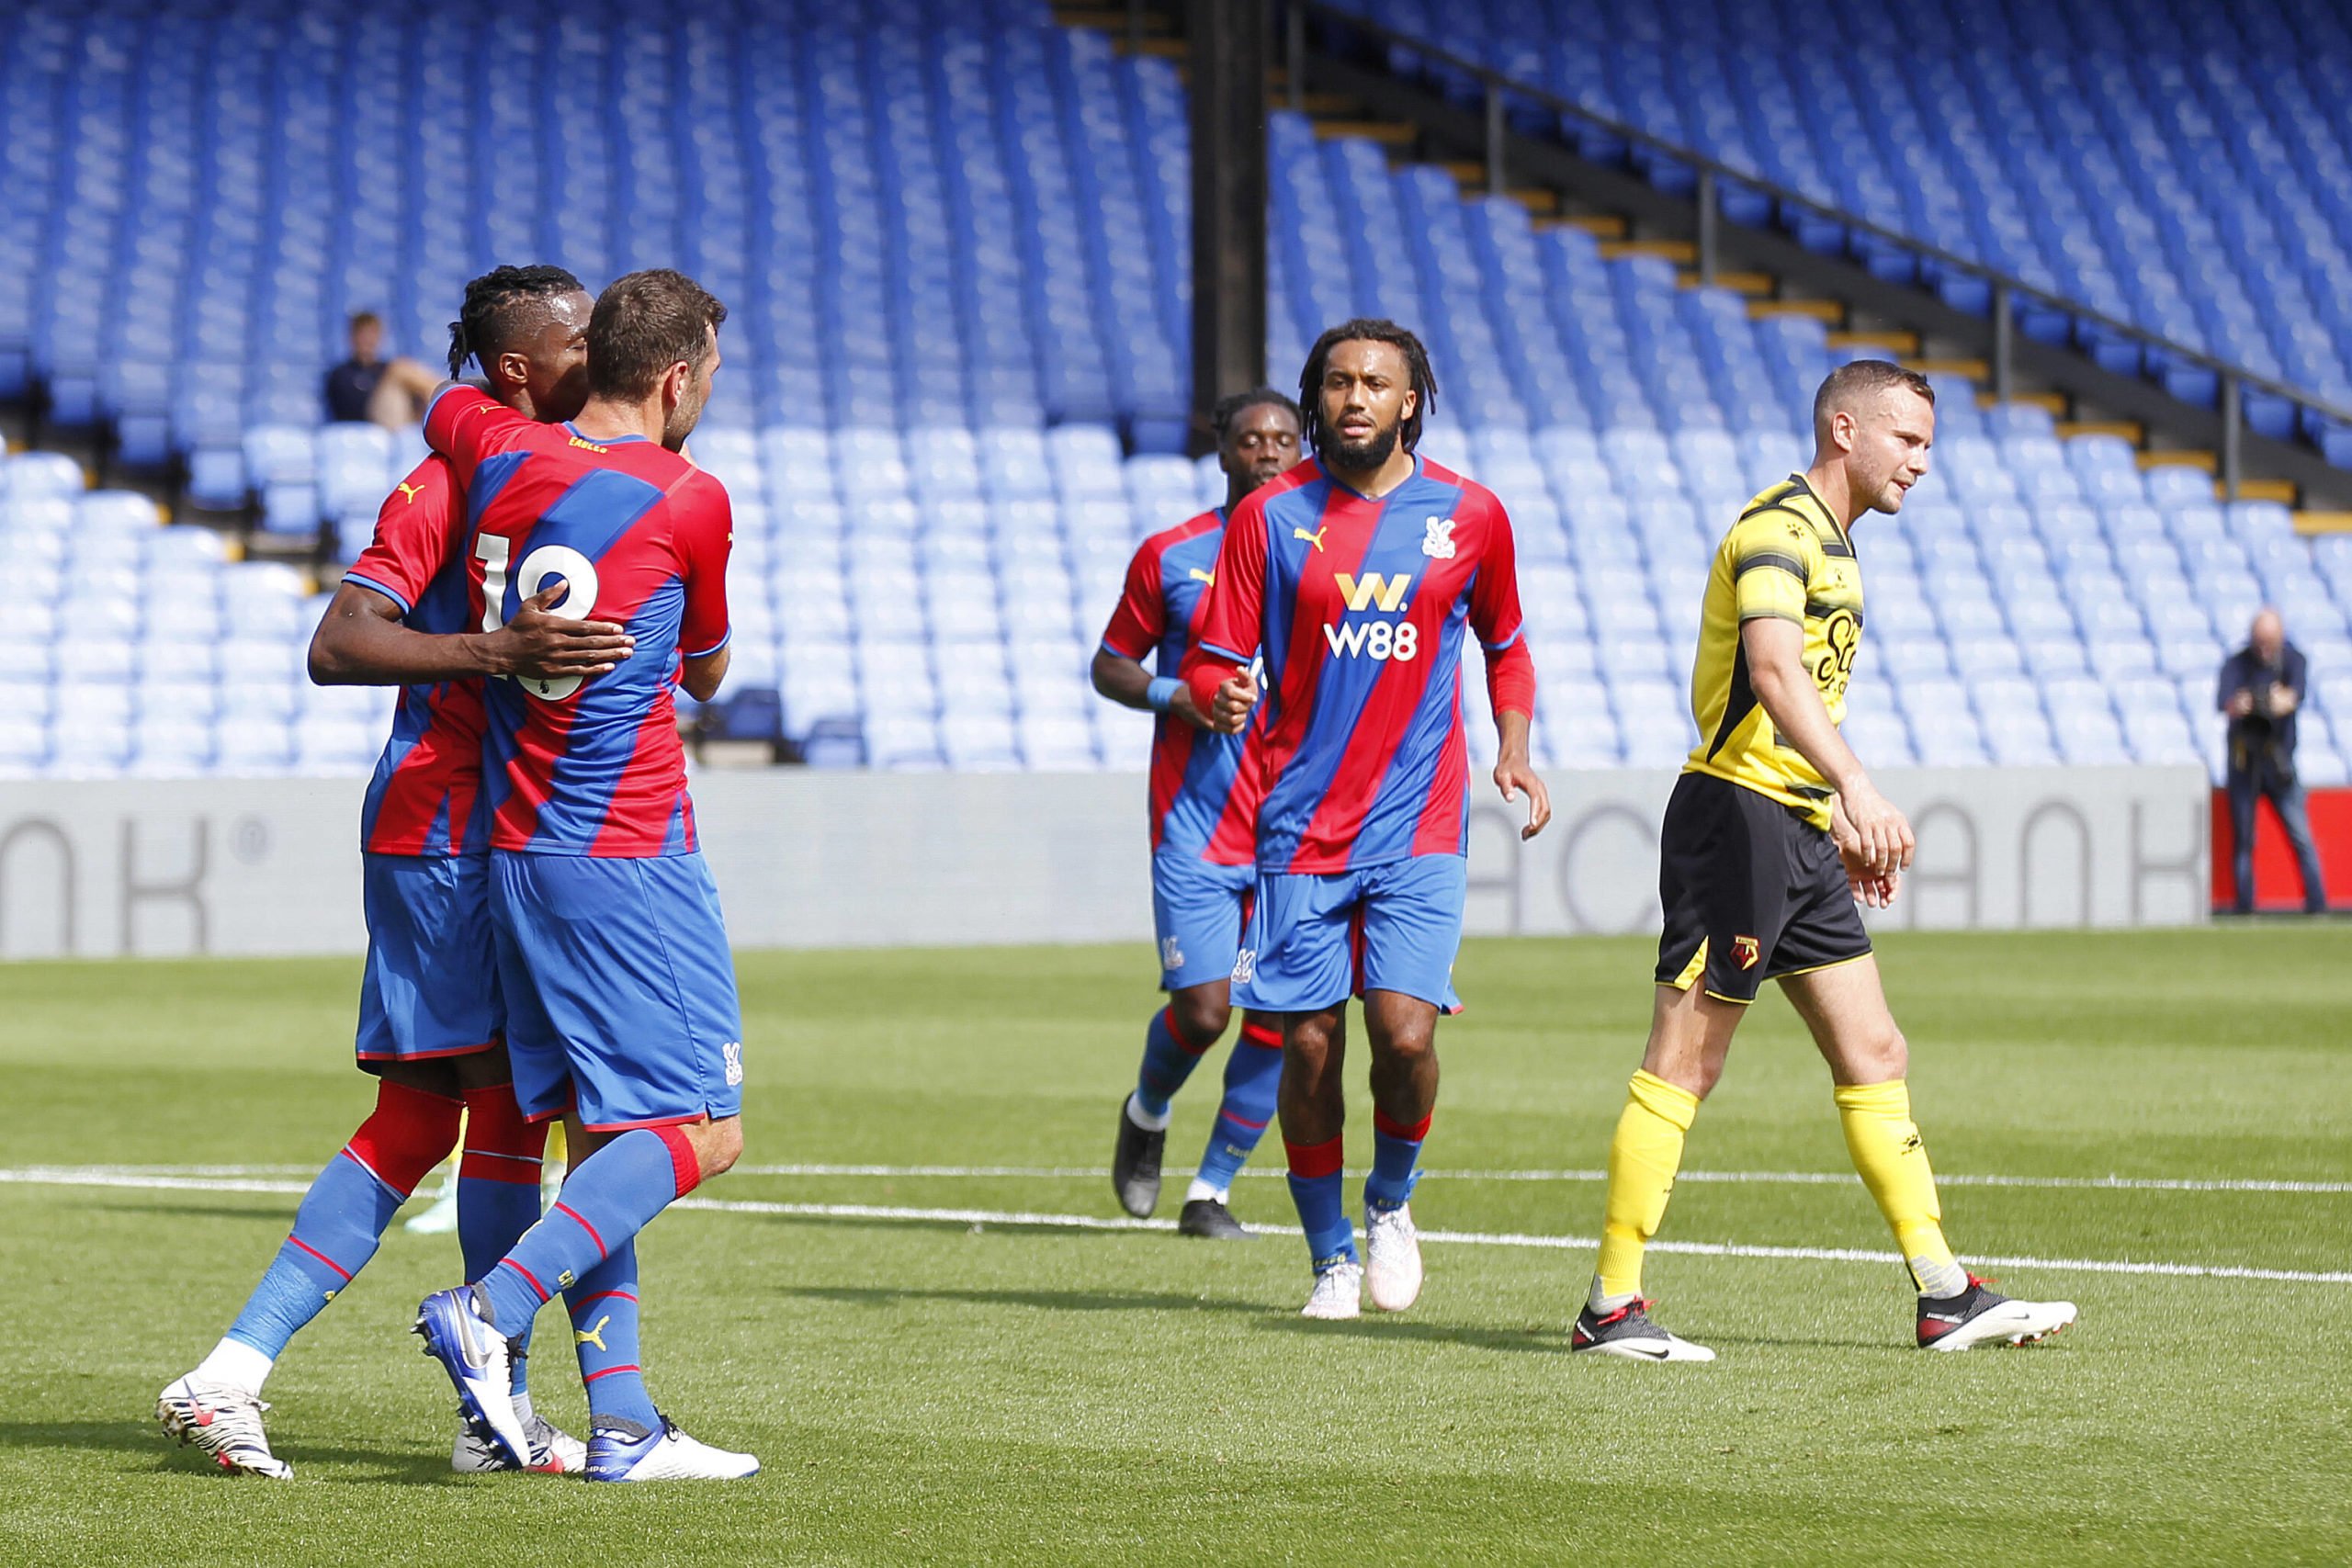 4-3-3 Crystal Palace Predicted Lineup Vs Chelsea (Crystal Palace players are seen in the photo)